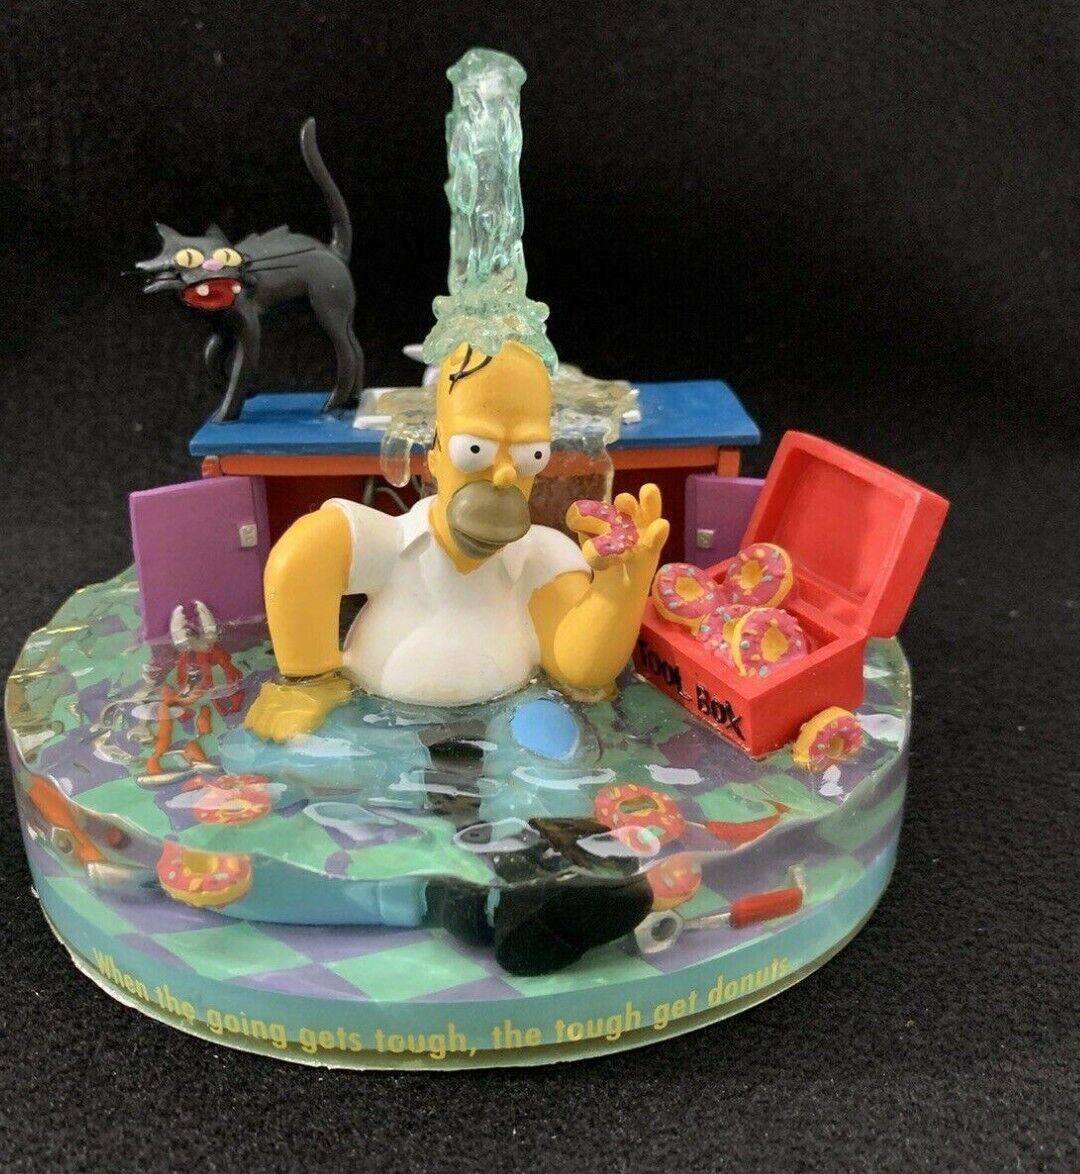 Simpsons Hamilton Collection ~When the Going Gets Rough, the Tough Gets Donuts~